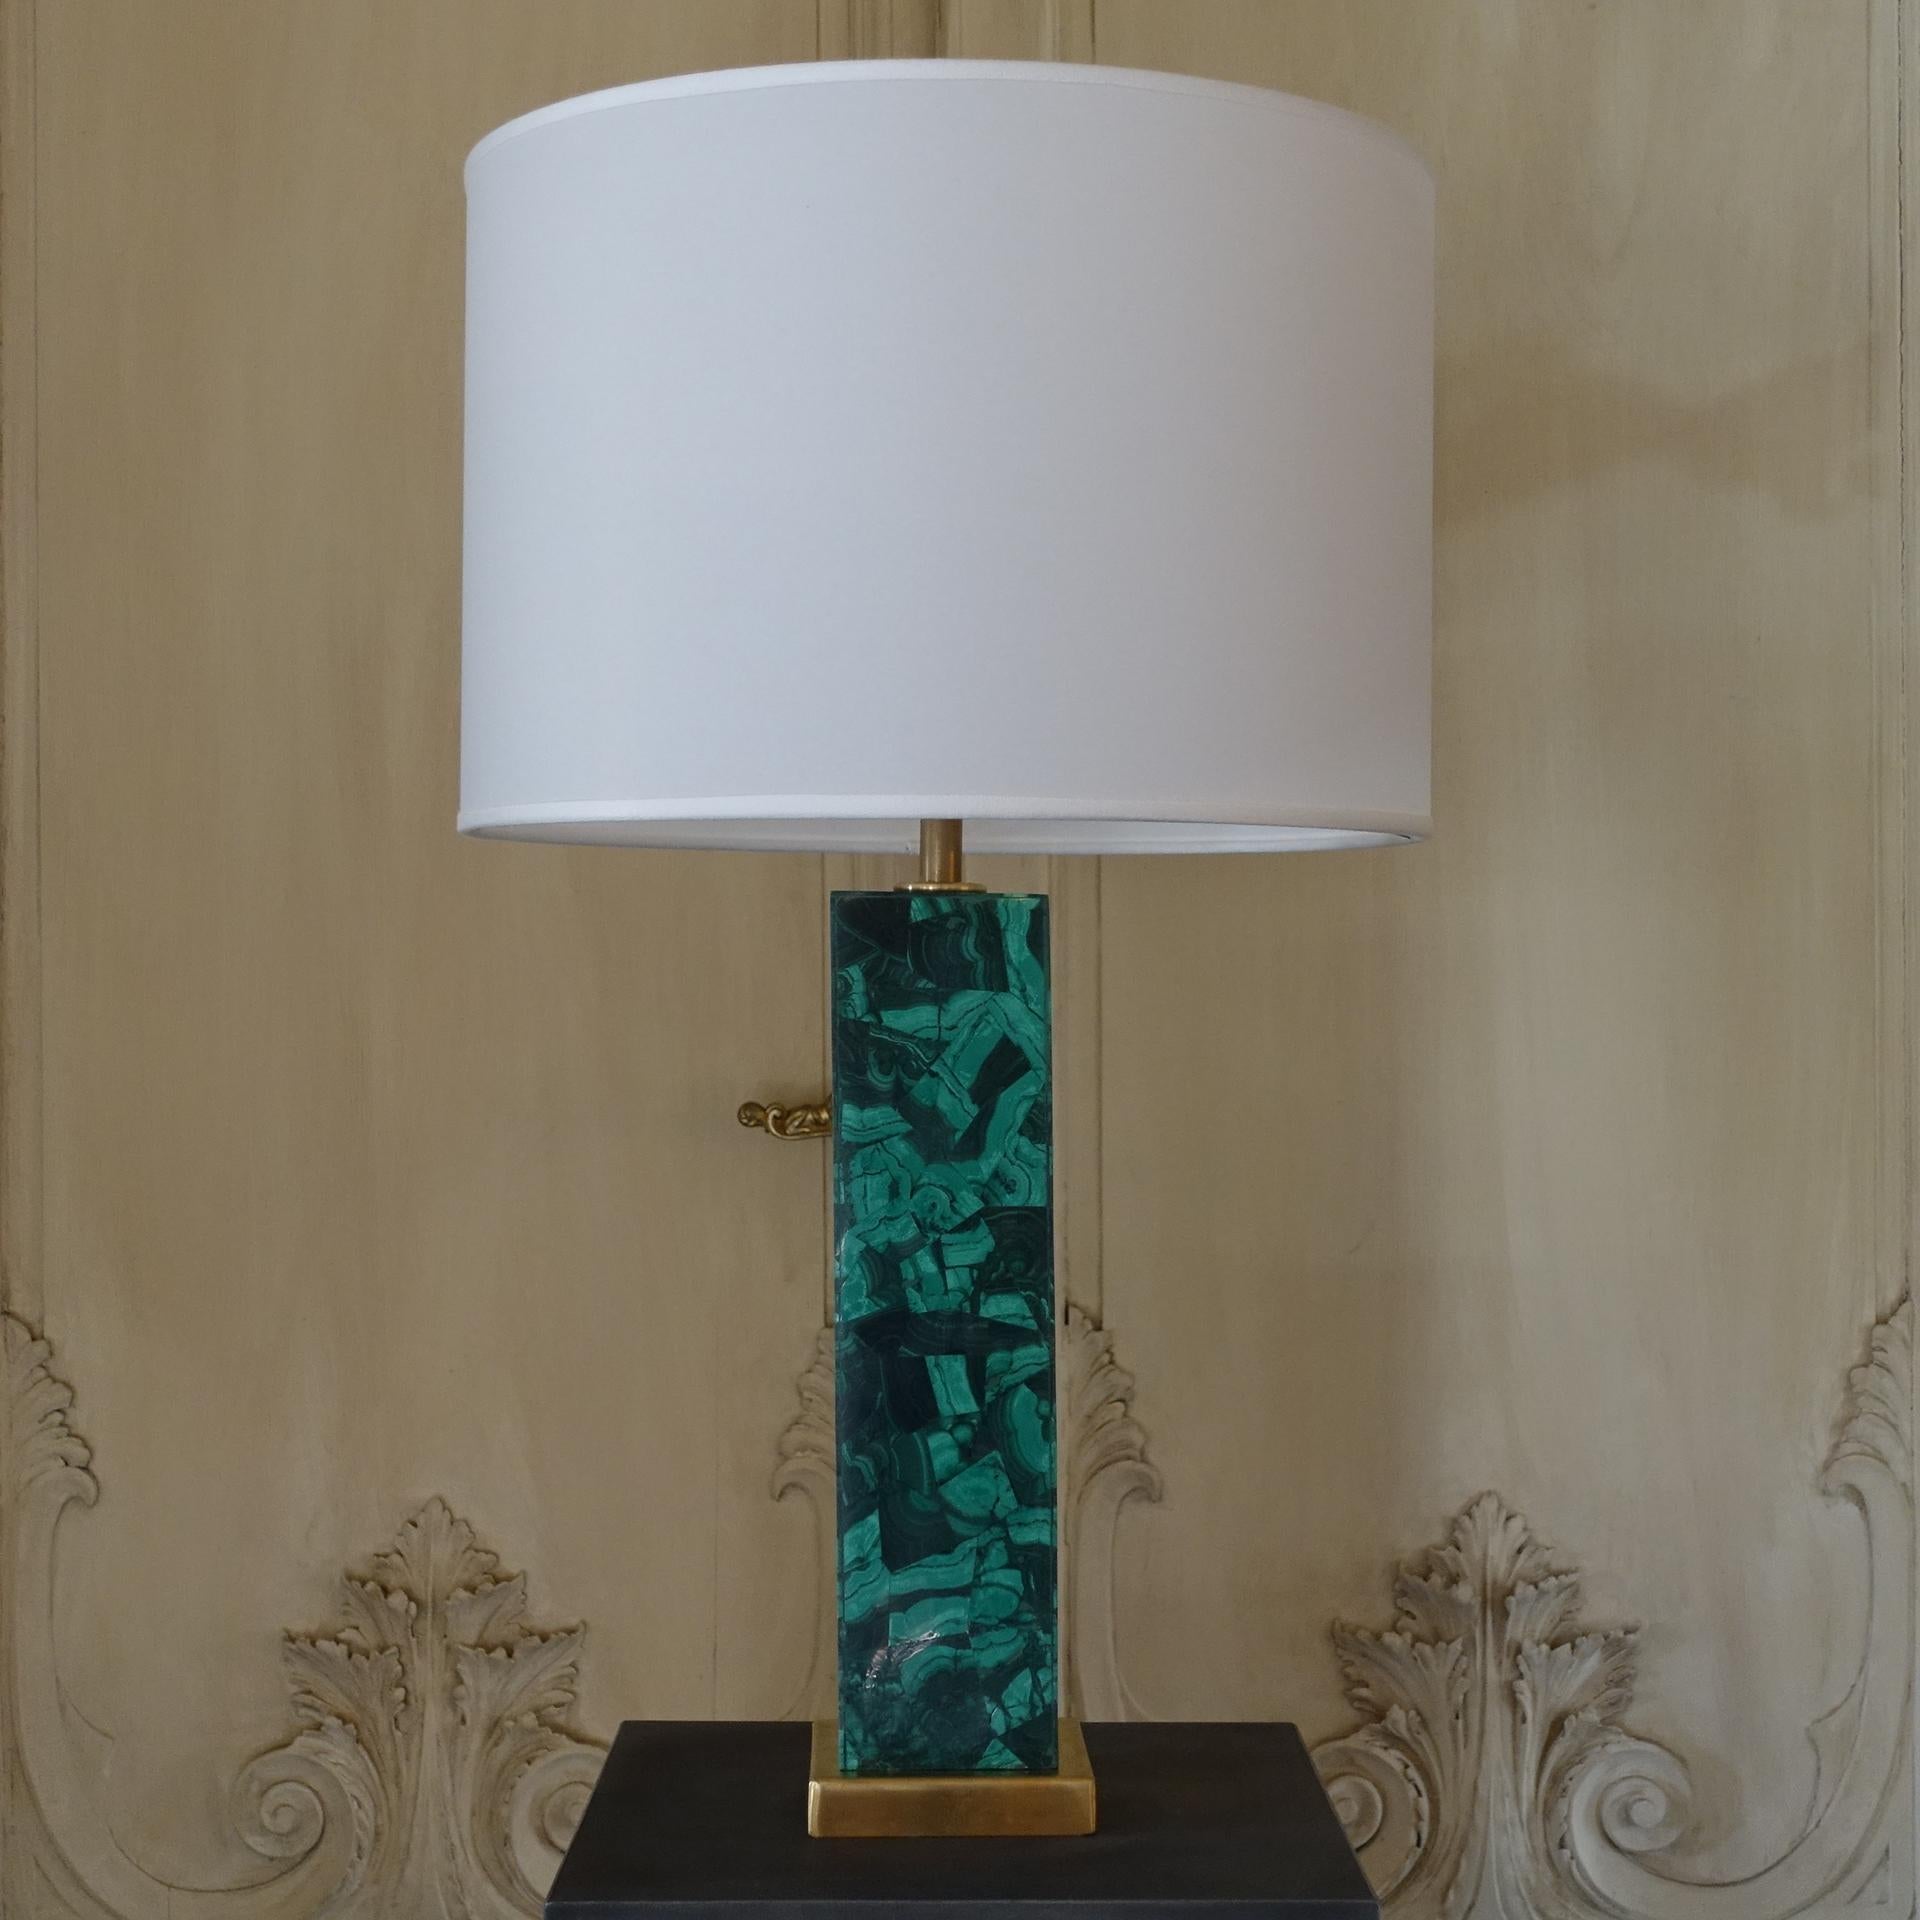 One of a kind table lamp in malachite with natural brass base, lampshade measures cm diameter 45 x height 30, total high cm 76, available the pair.